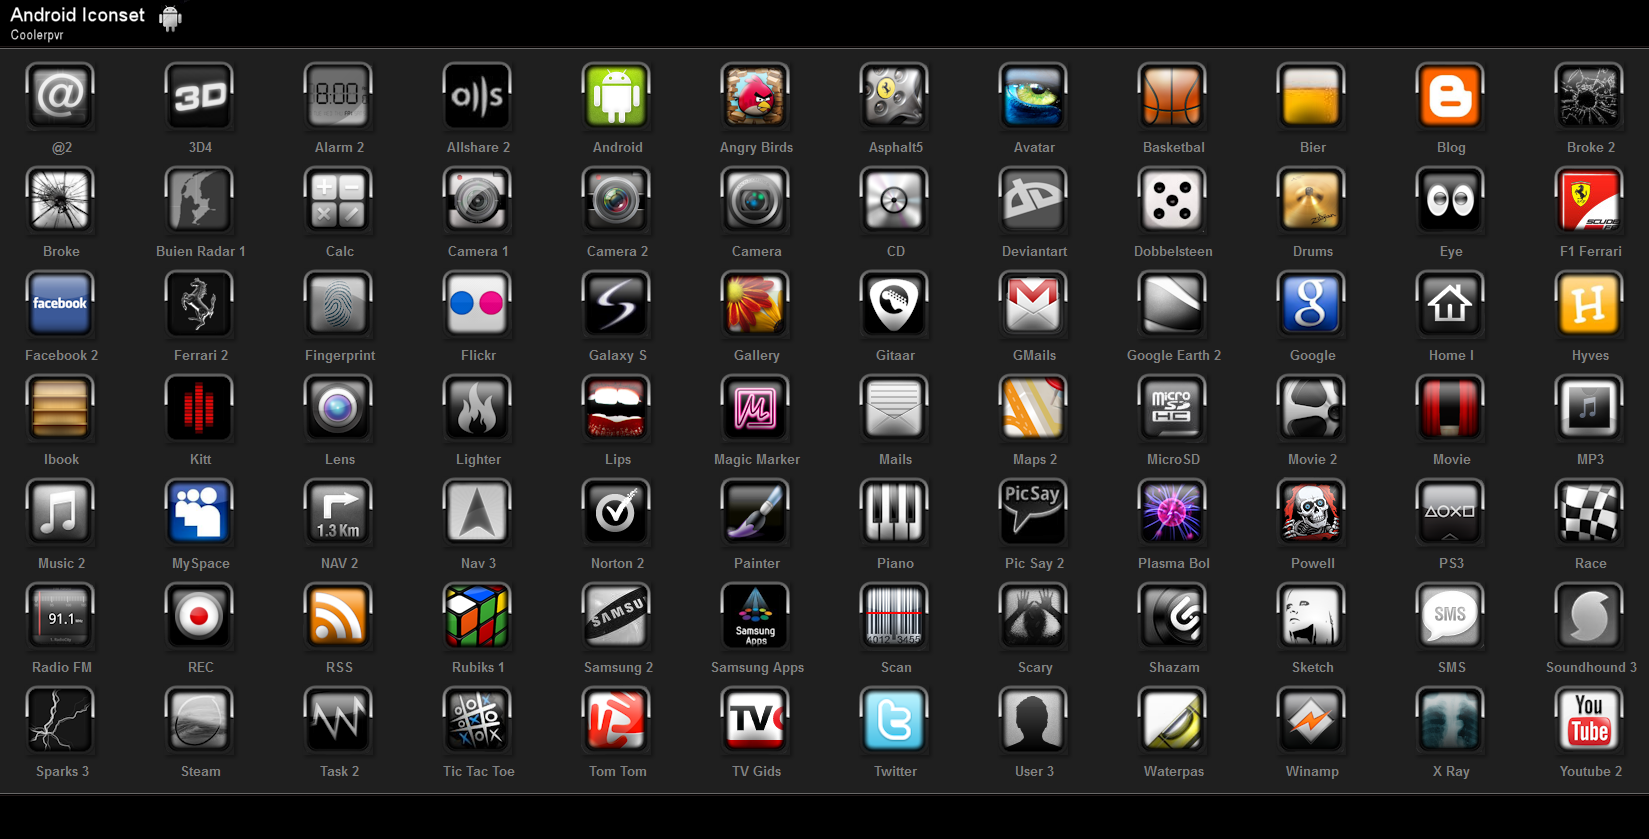 Android icons - Download free PNG web icons - IconsParadise